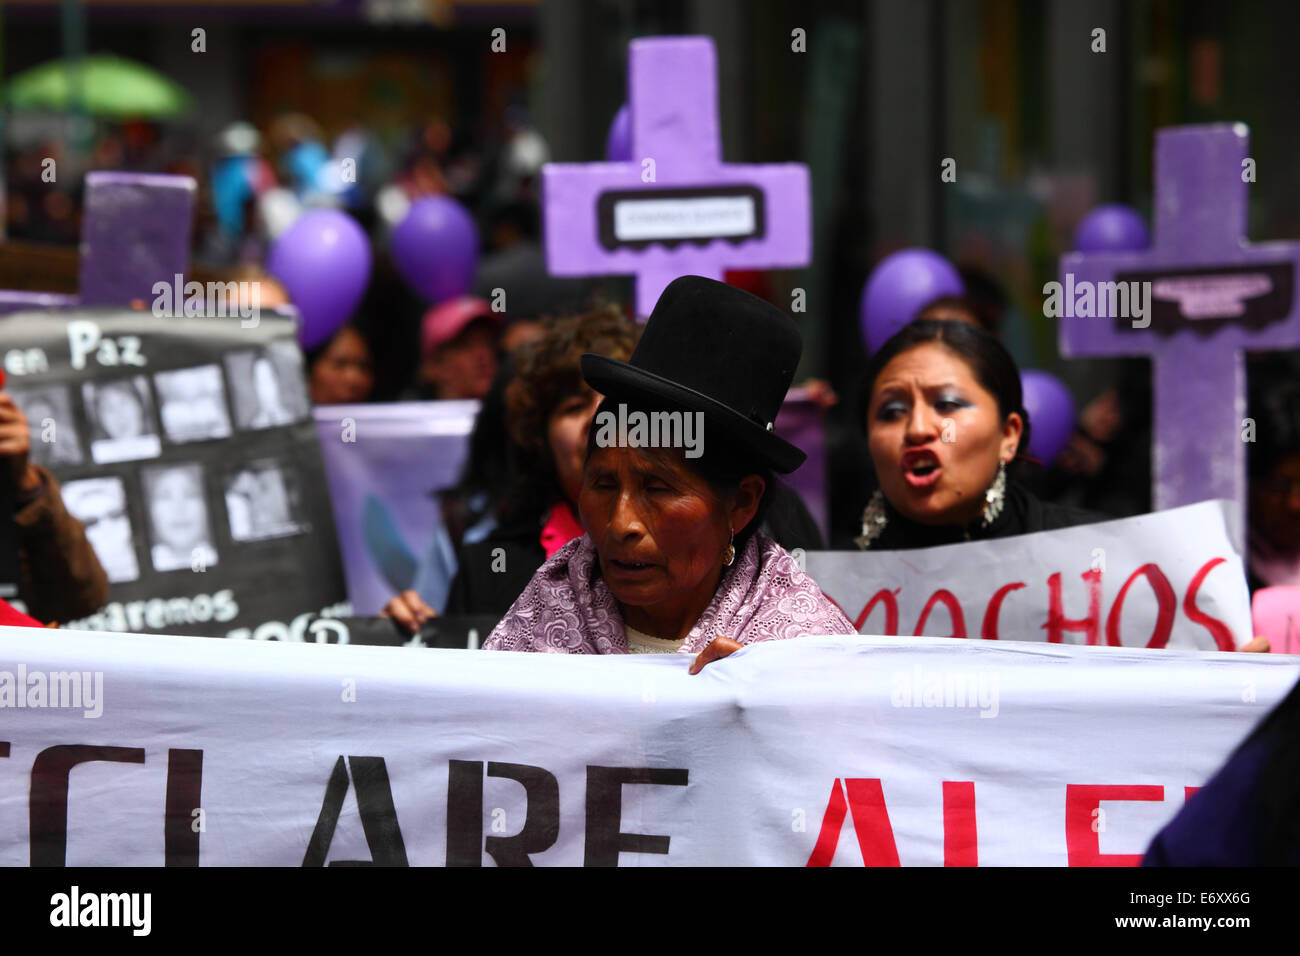 La Paz, Bolivia, 1st September 2014. Womens Rights Activists and supporters carry crosses with the names of victims during a march to protest against violence against women. The march was also to repudiate recent statements made by several candidates during the current election campaign that appear to minimise the problem and discriminate against women. According to a WHO report in January 2013 Bolivia is the country with the highest rate of violence against women in Latin America, there have been 453 cases of femicide since 2006 during the current government. Credit:  James Brunker/Alamy Live Stock Photo